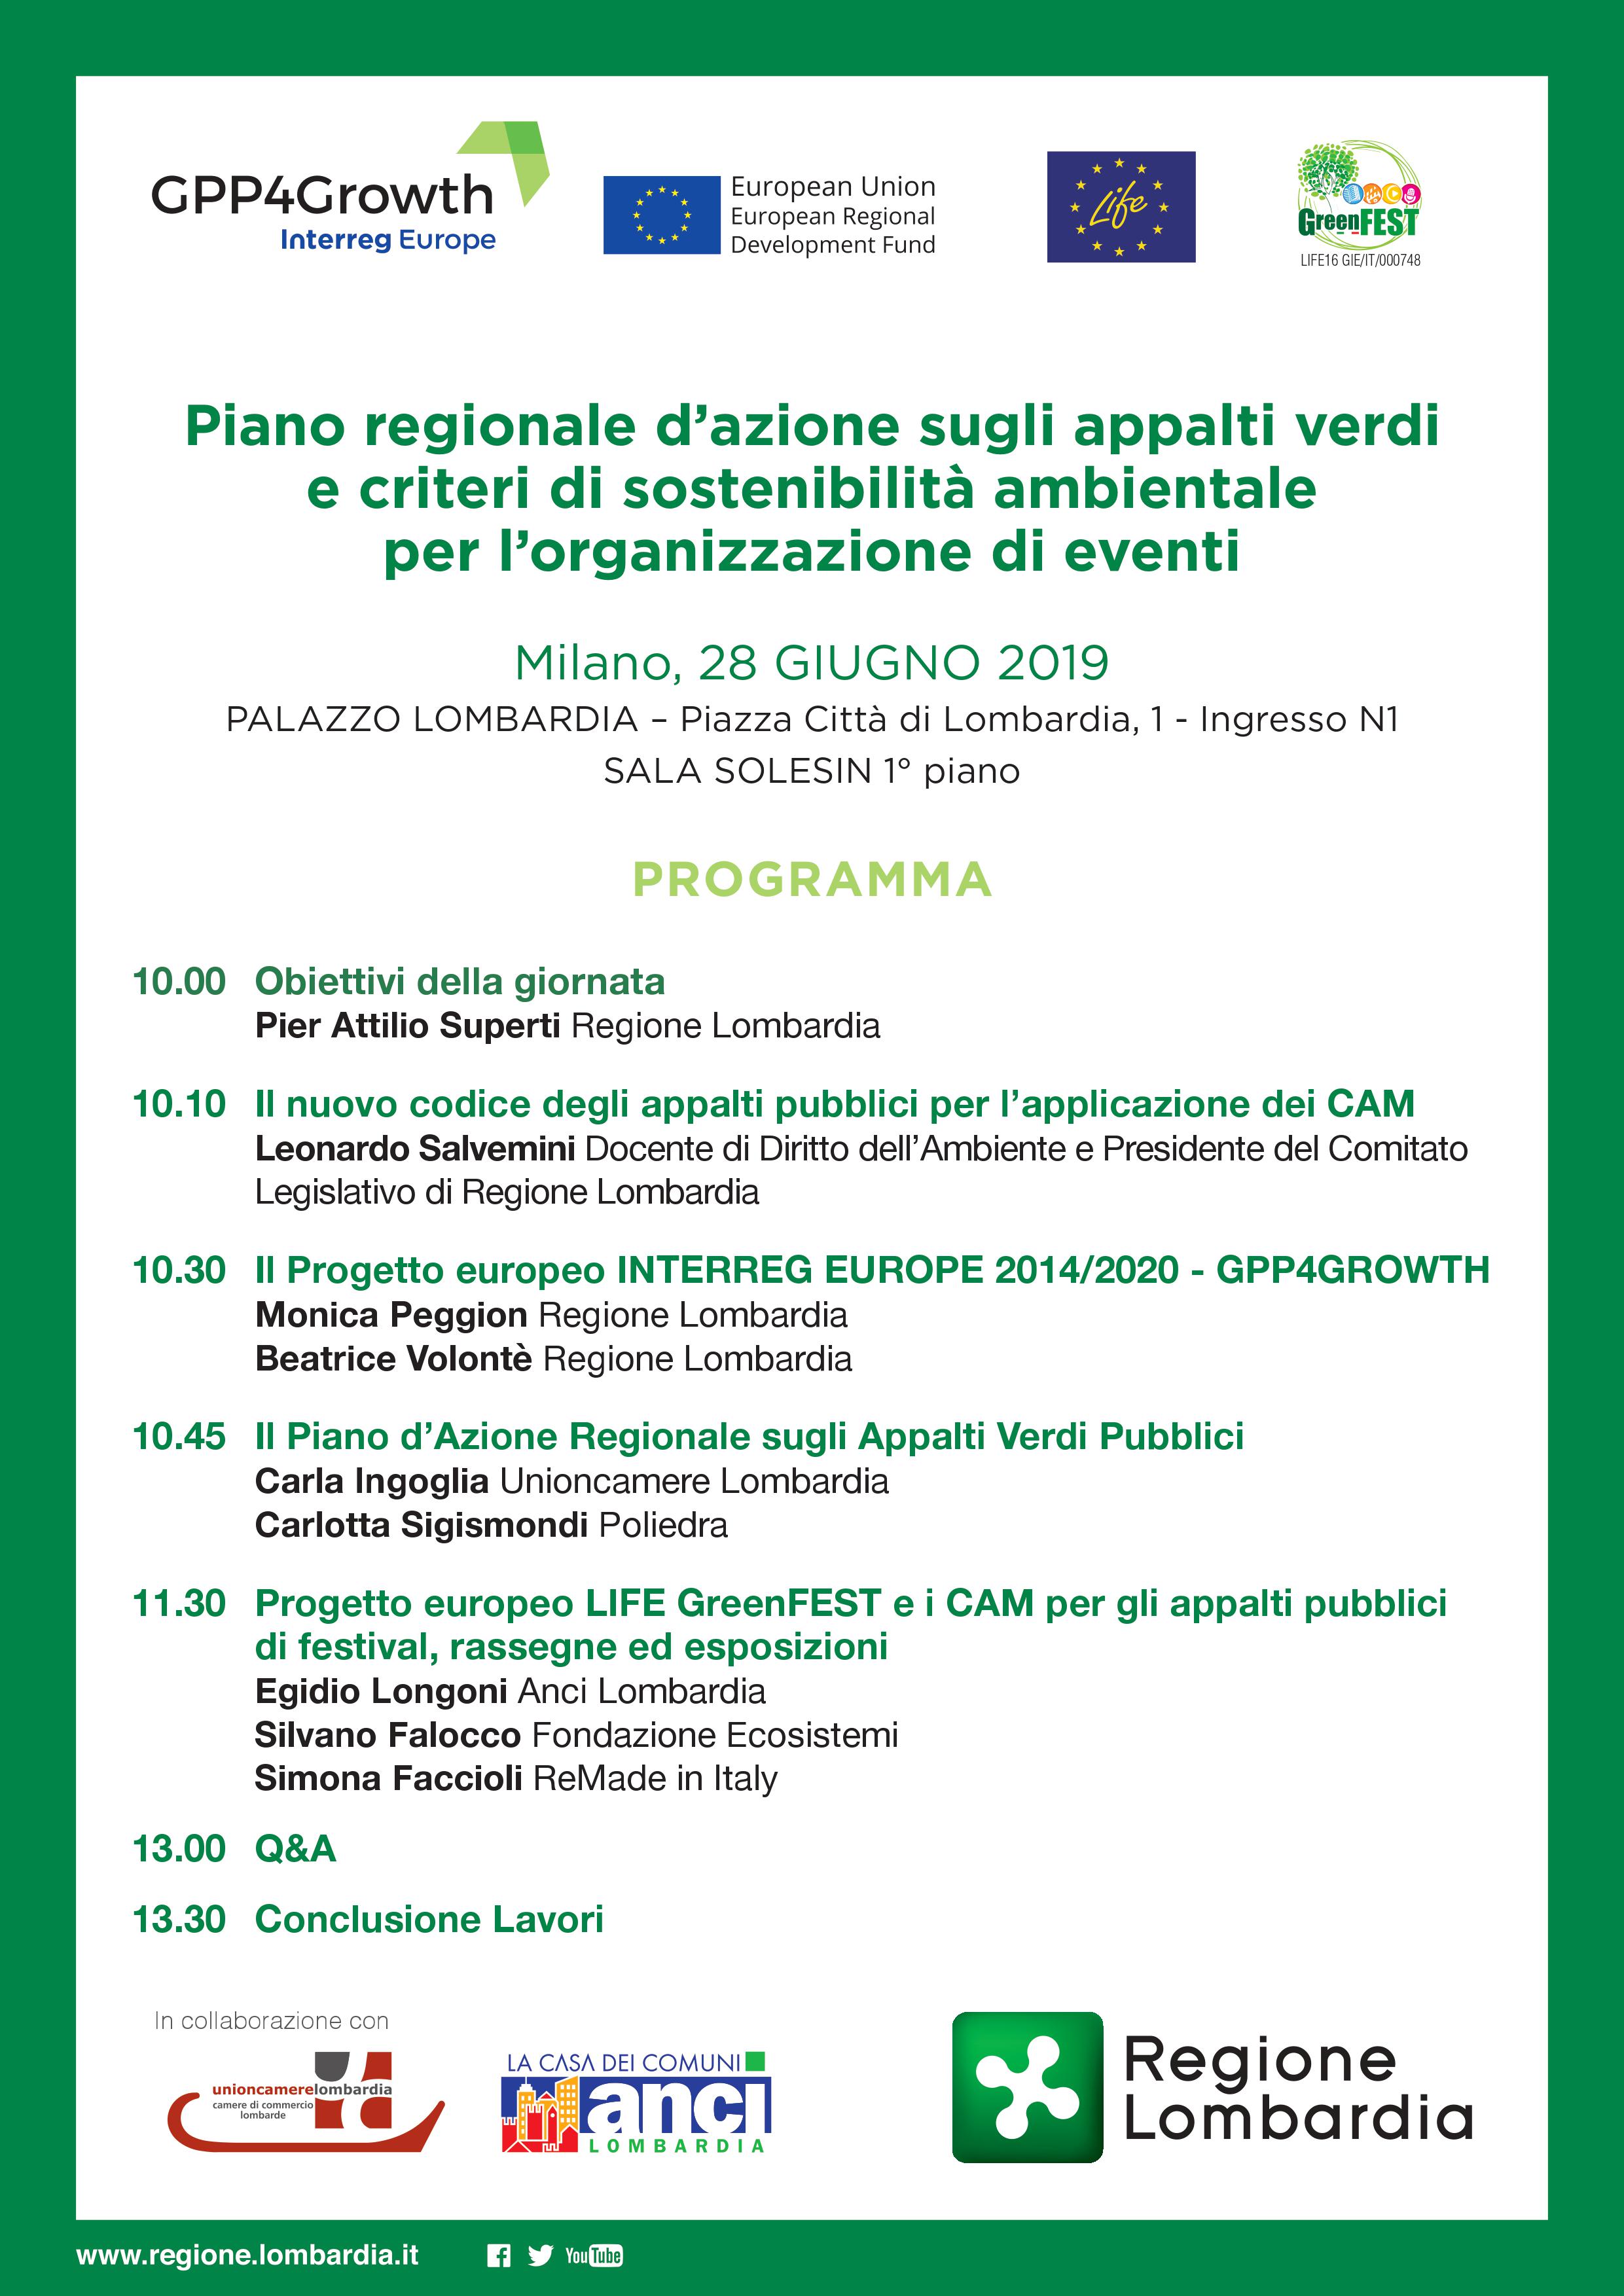 Lombardy Region Action Plan on Green Procurement 